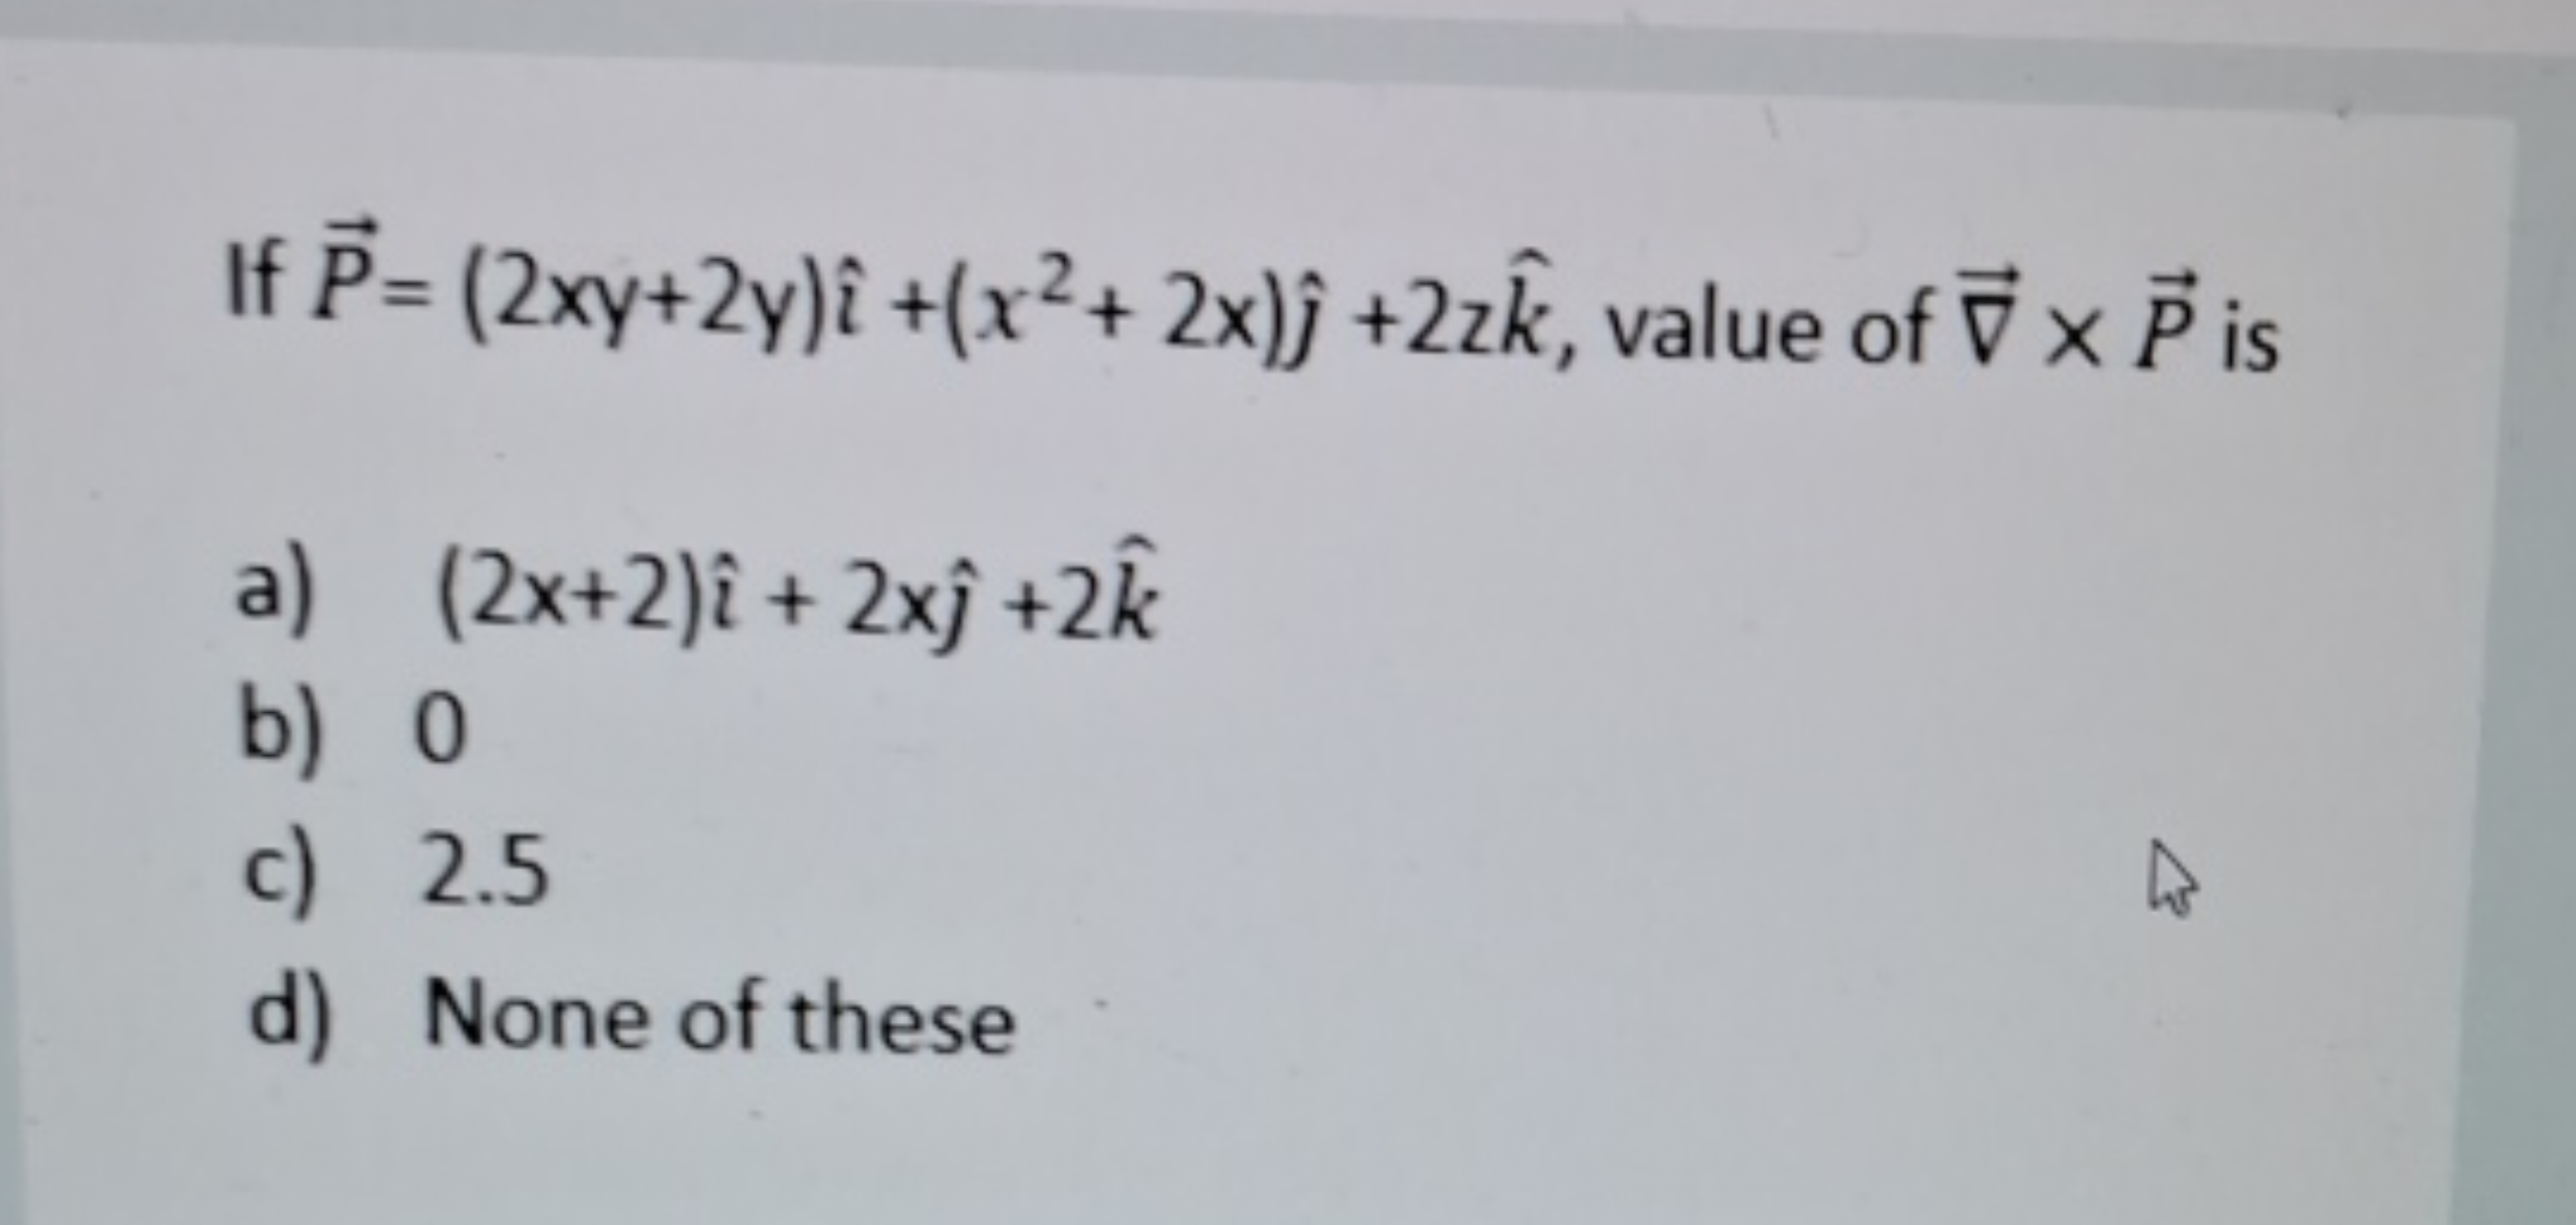 If P=(2xy+2y)^+(x2+2x)^​+2zk^, value of ∇×P is